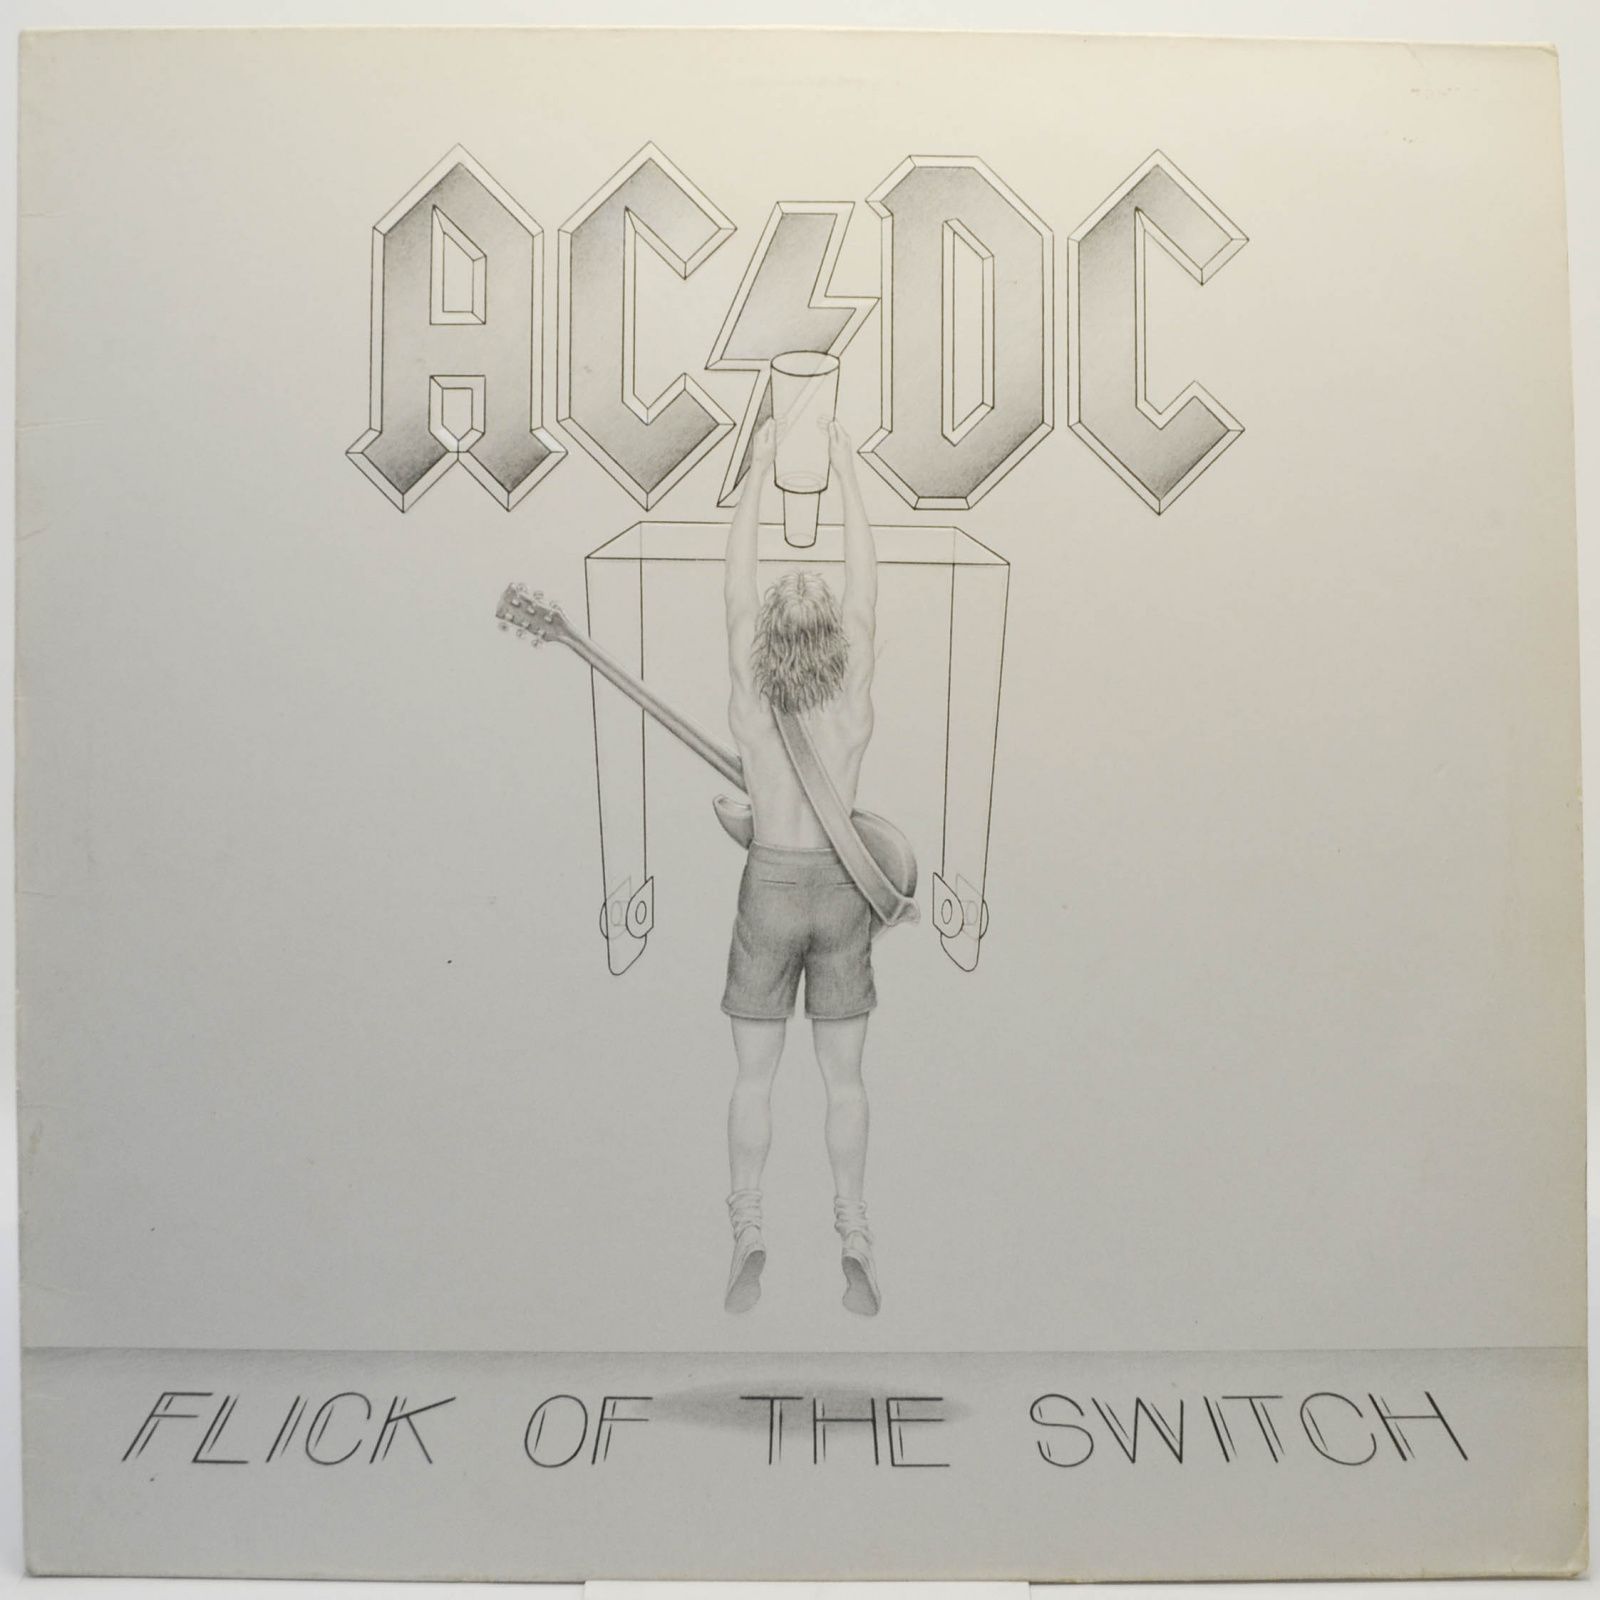 AC/DC — Flick Of The Switch, 1983